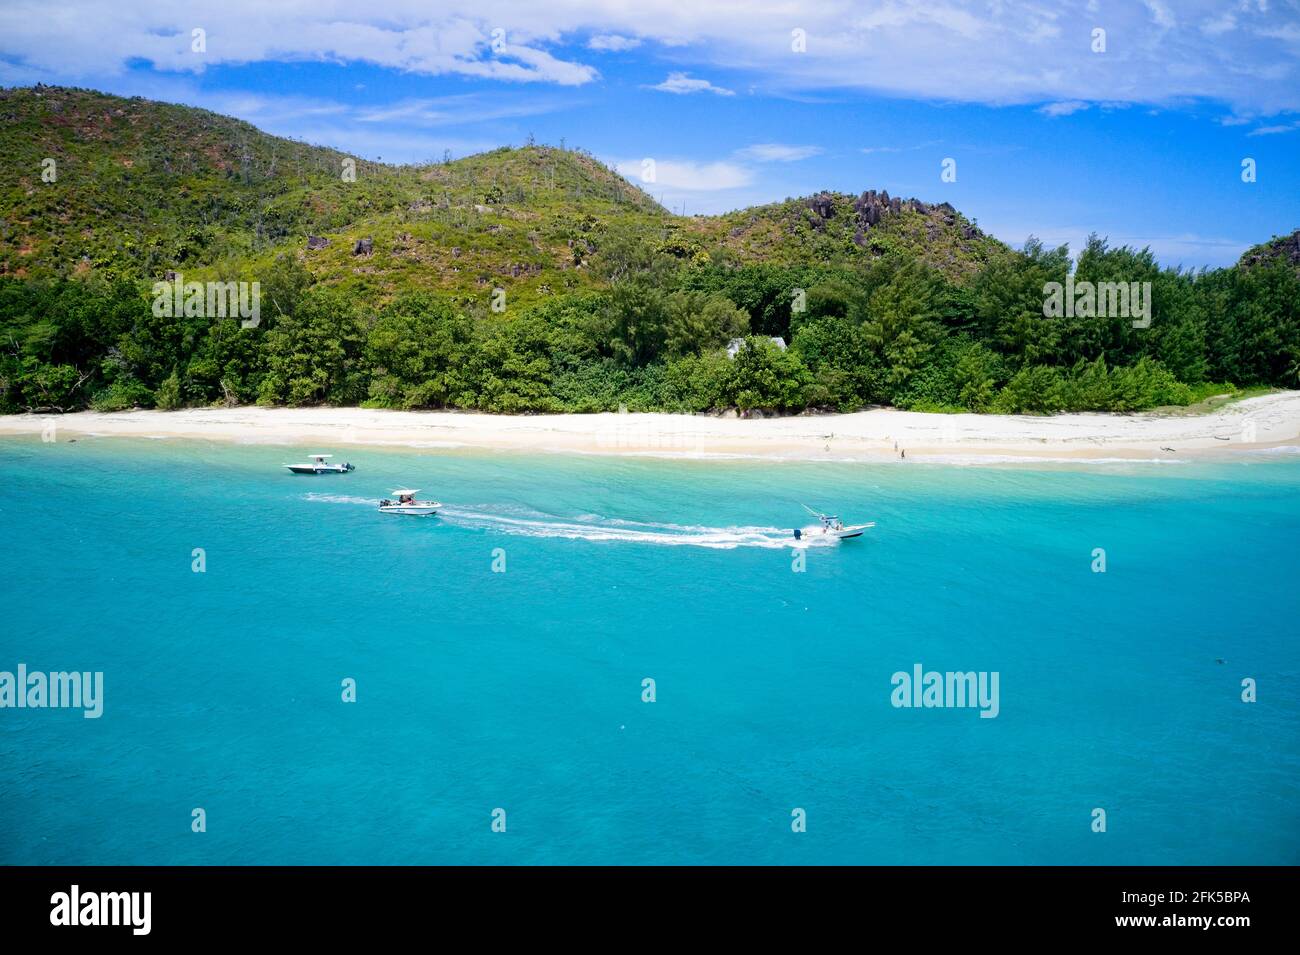 Drone field of view of speeding boat in turquoise water Curieuse Island, Seychelles. Stock Photo